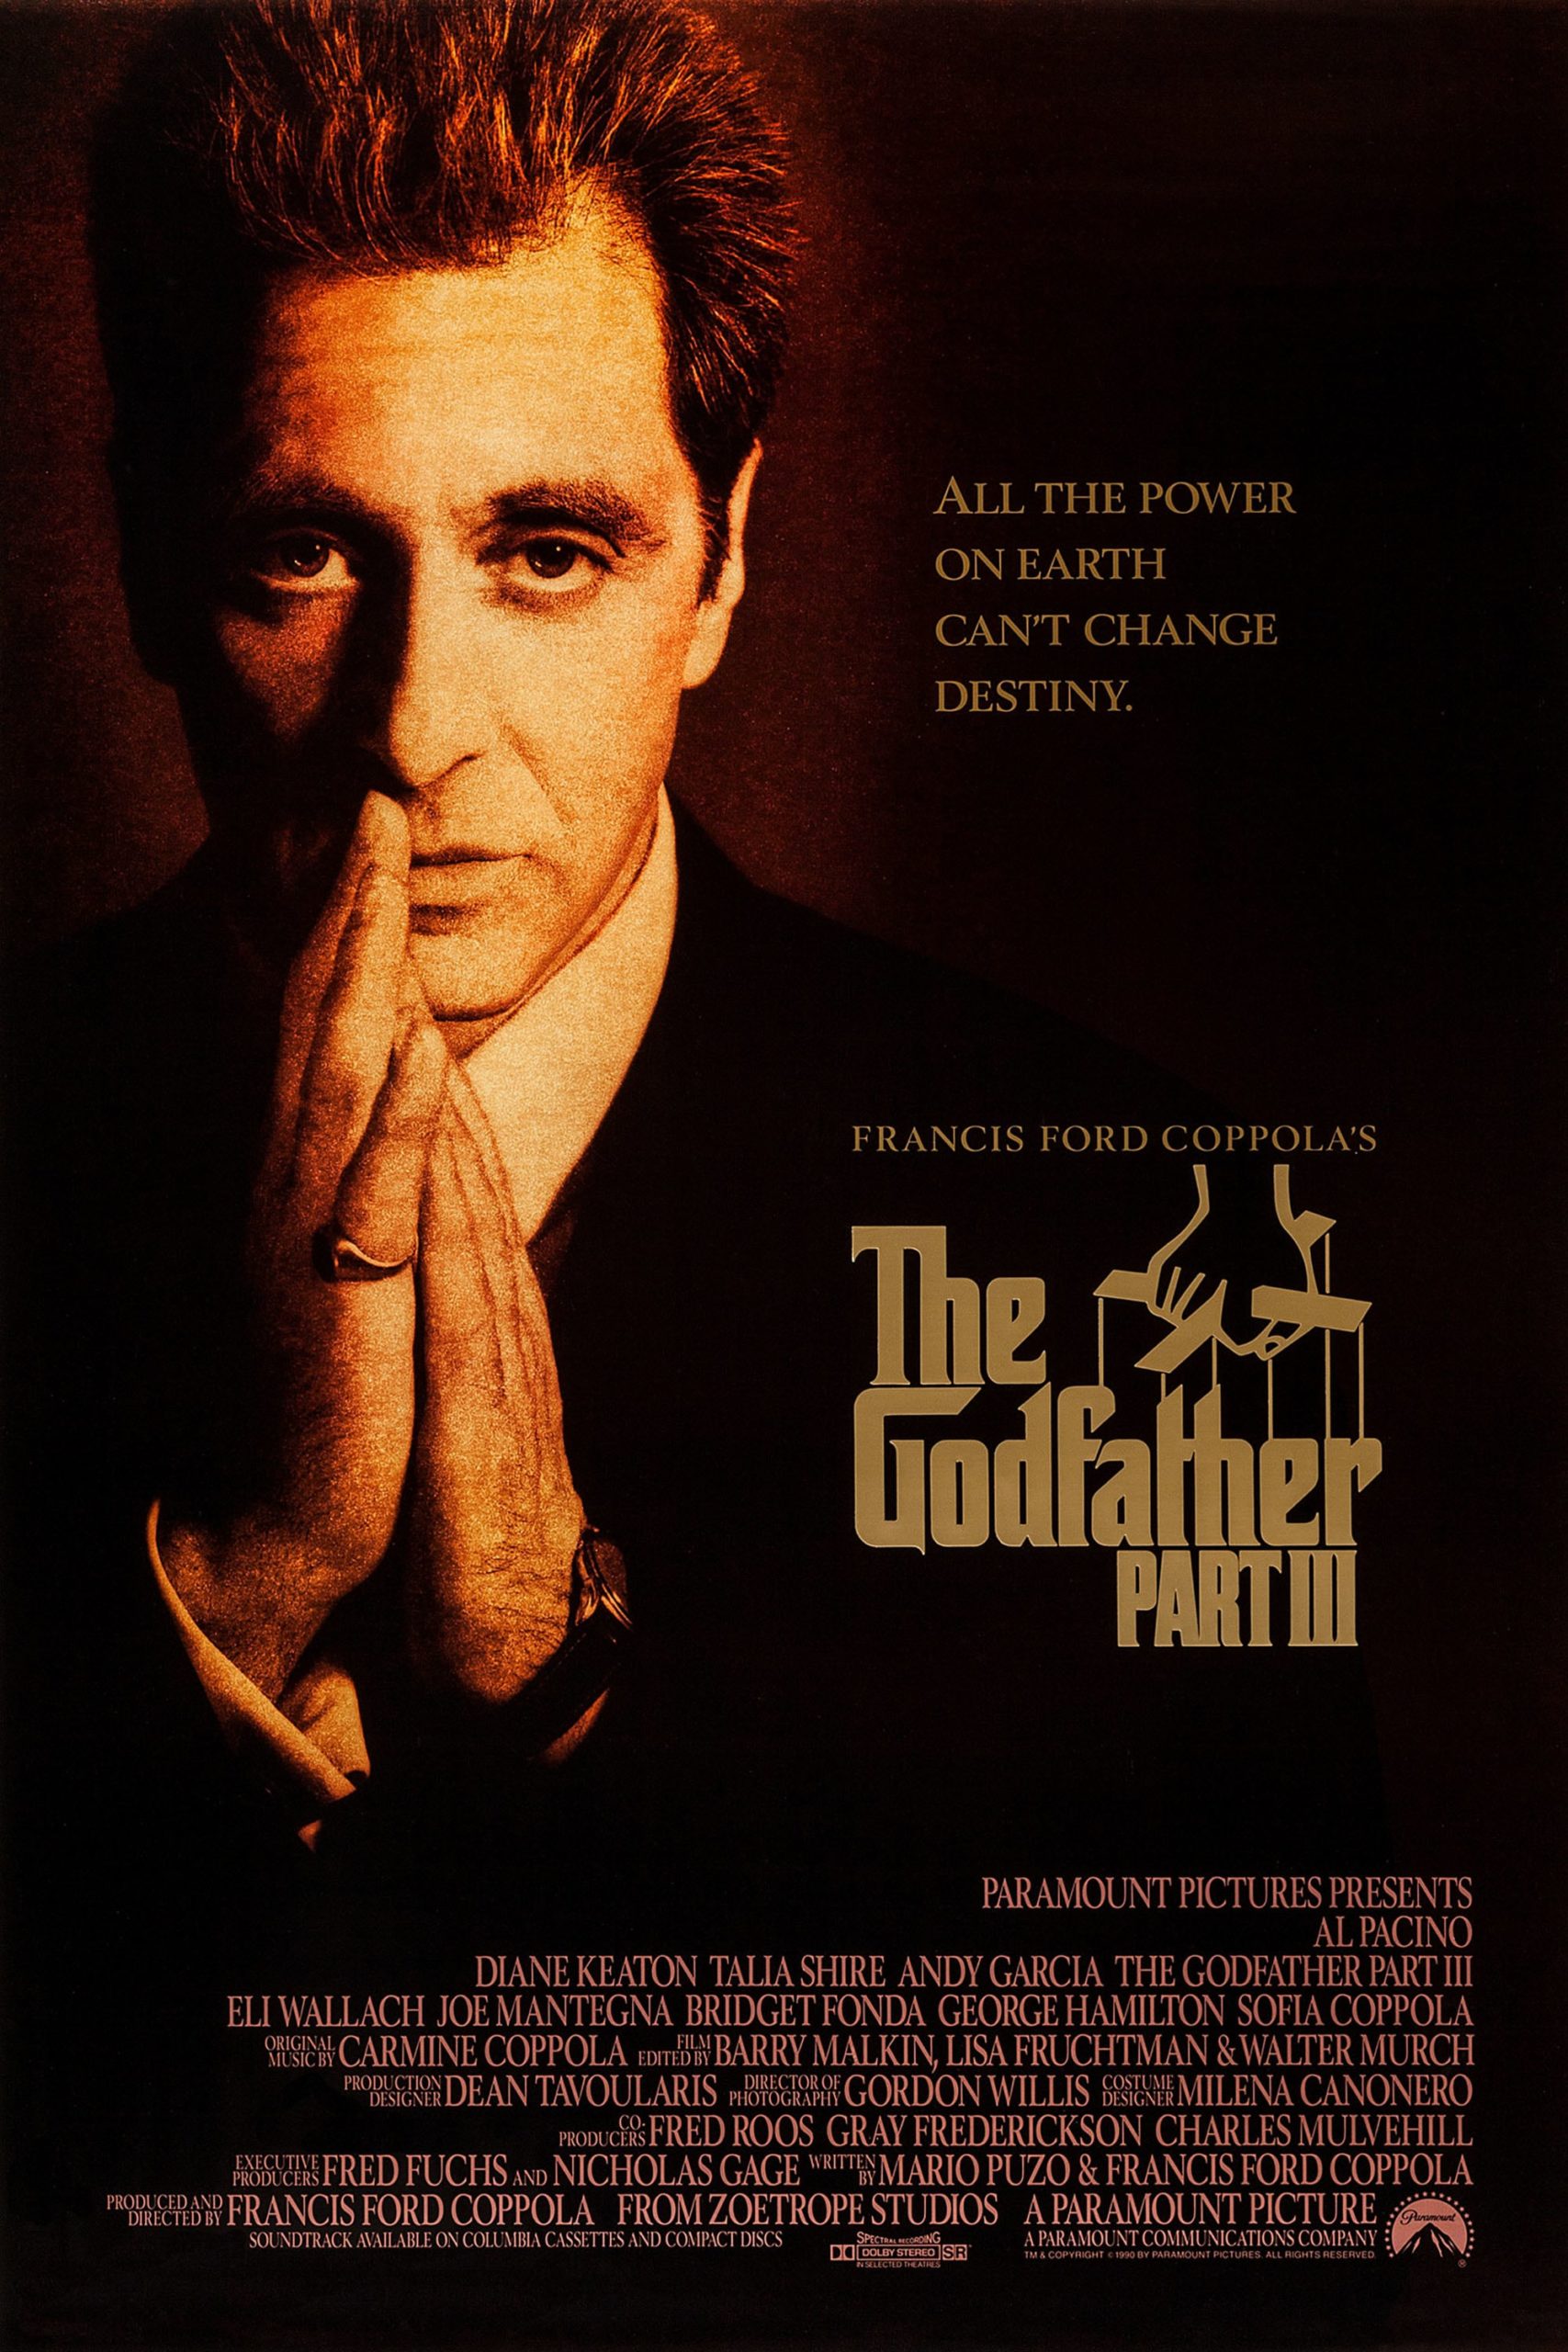 The Godfather, Part III poster